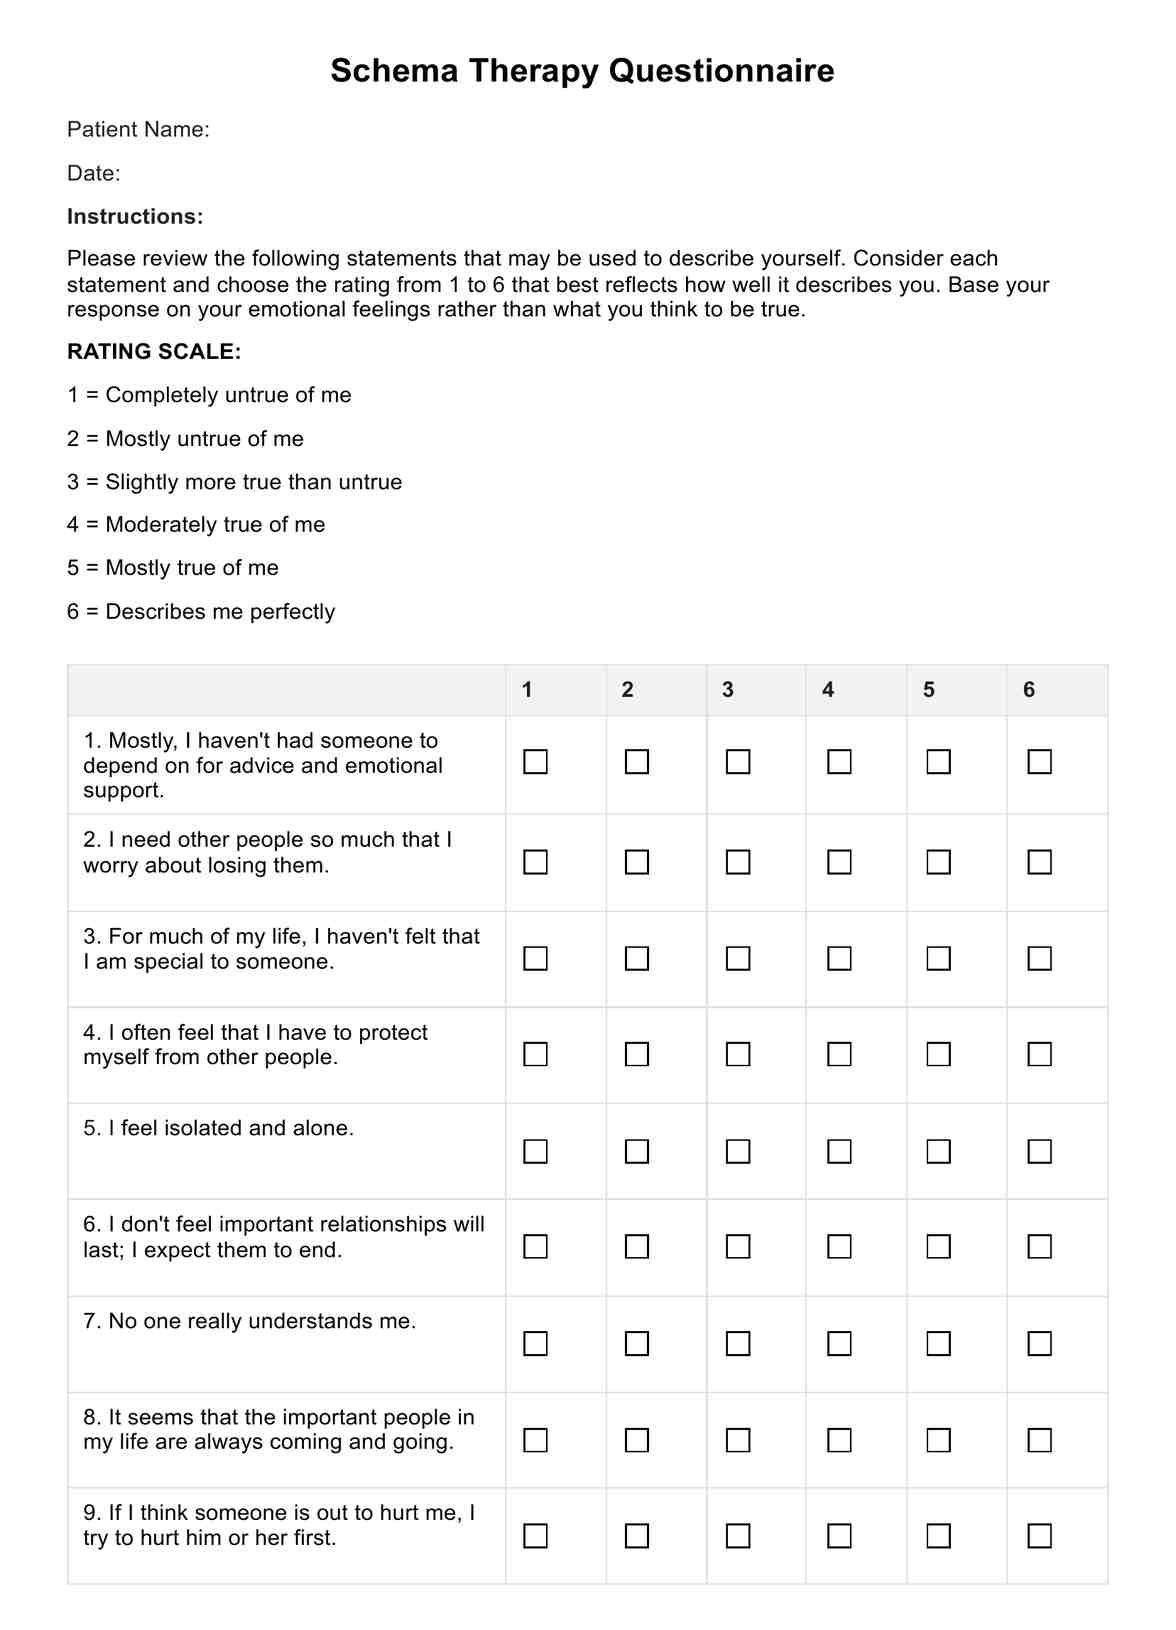 Schema Therapy Questionnaire PDF Example